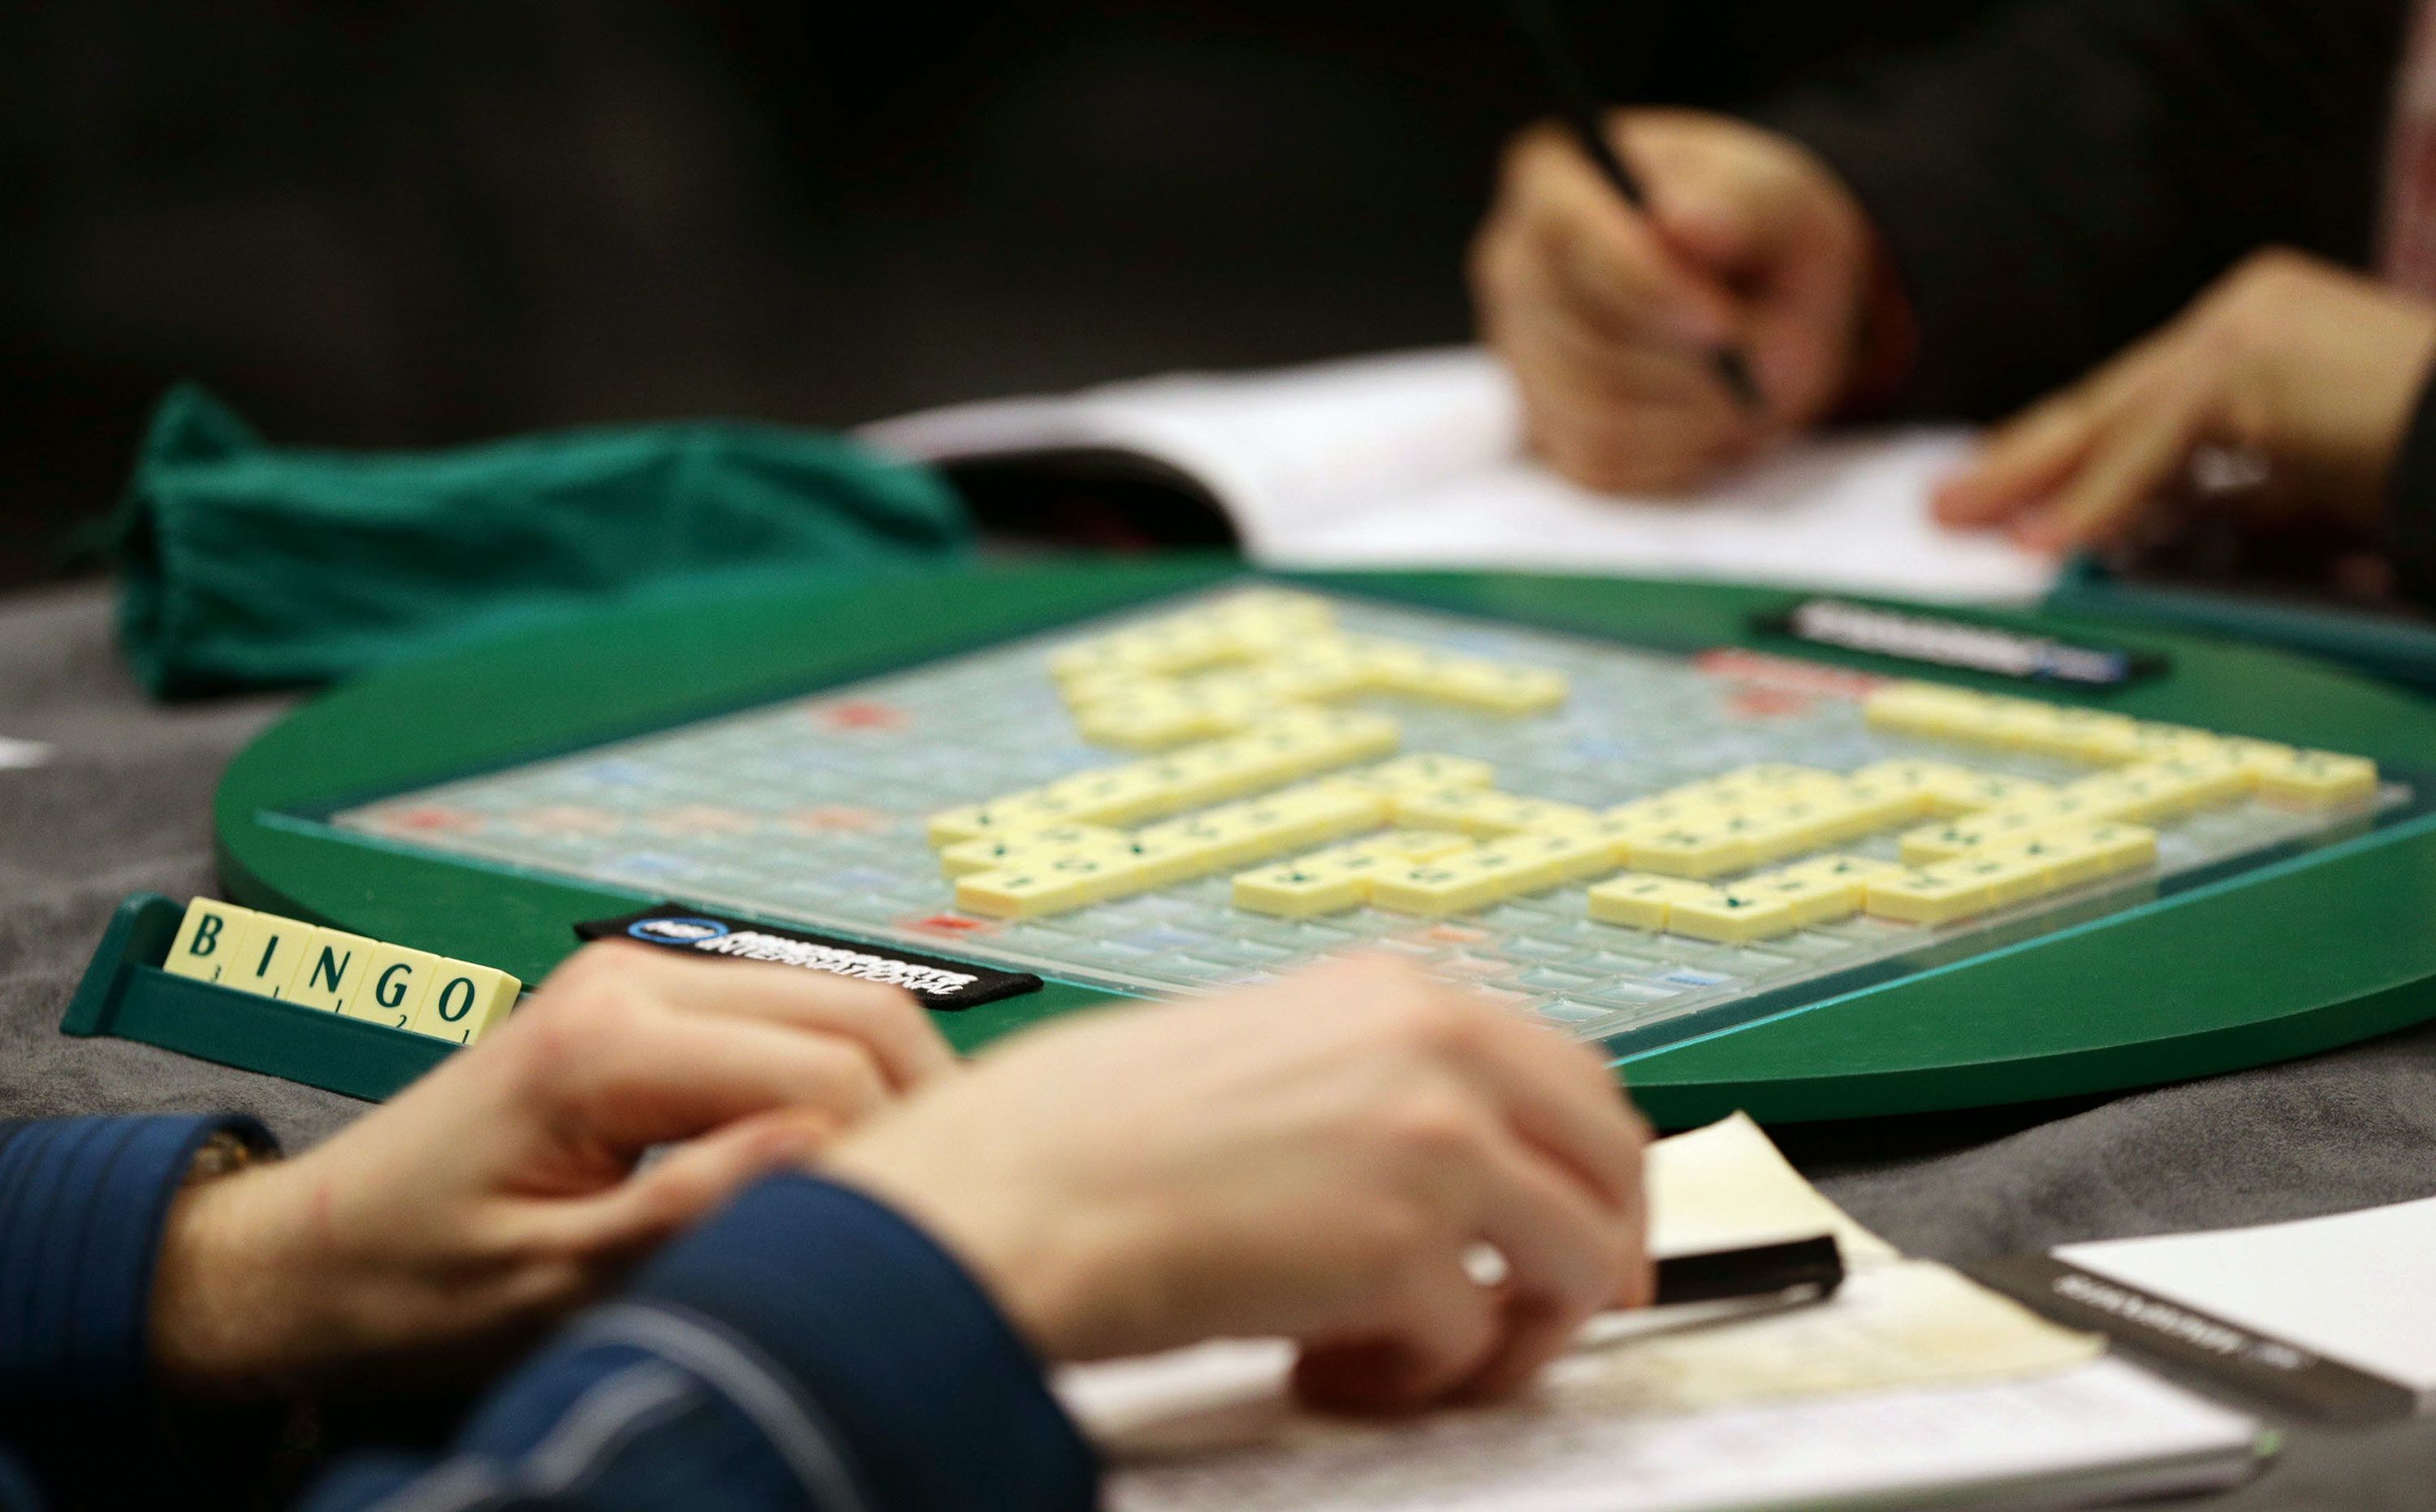 Scrabble players are apoplectic over game's new words